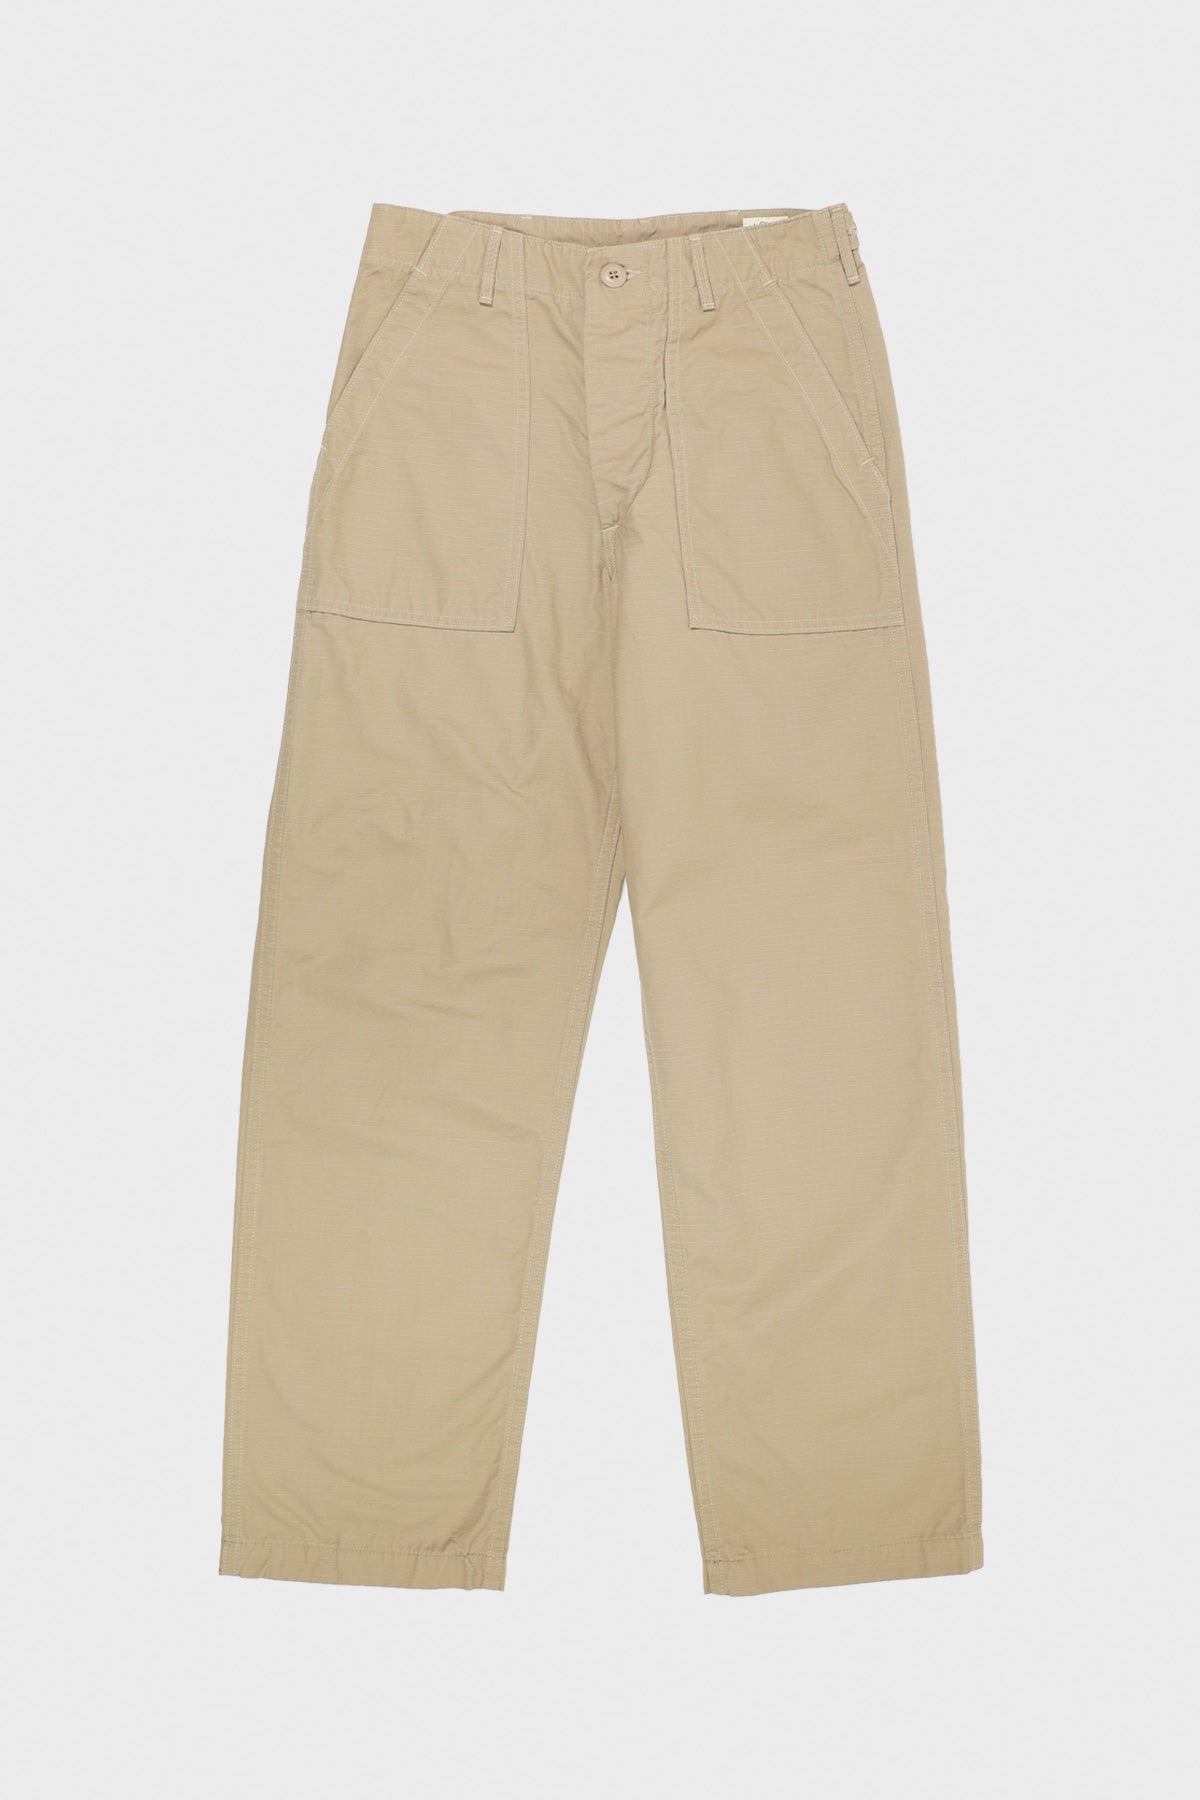 OrSlow US Army Fatigue Pants | Beige Ripstop | Canoe Club